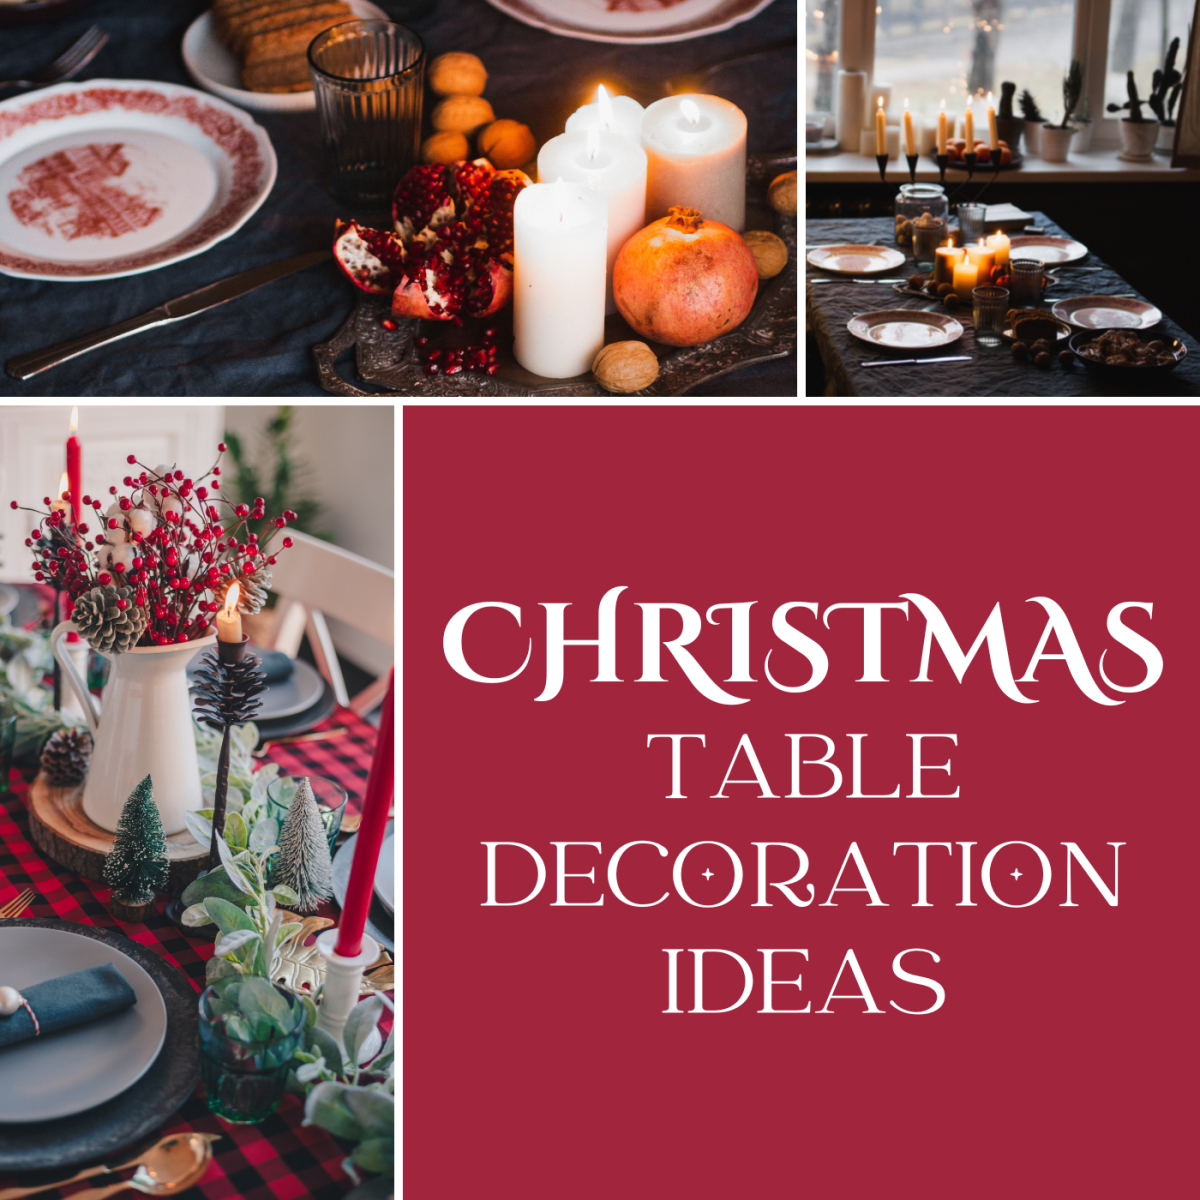 Get inspiration for setting your holiday table this year!